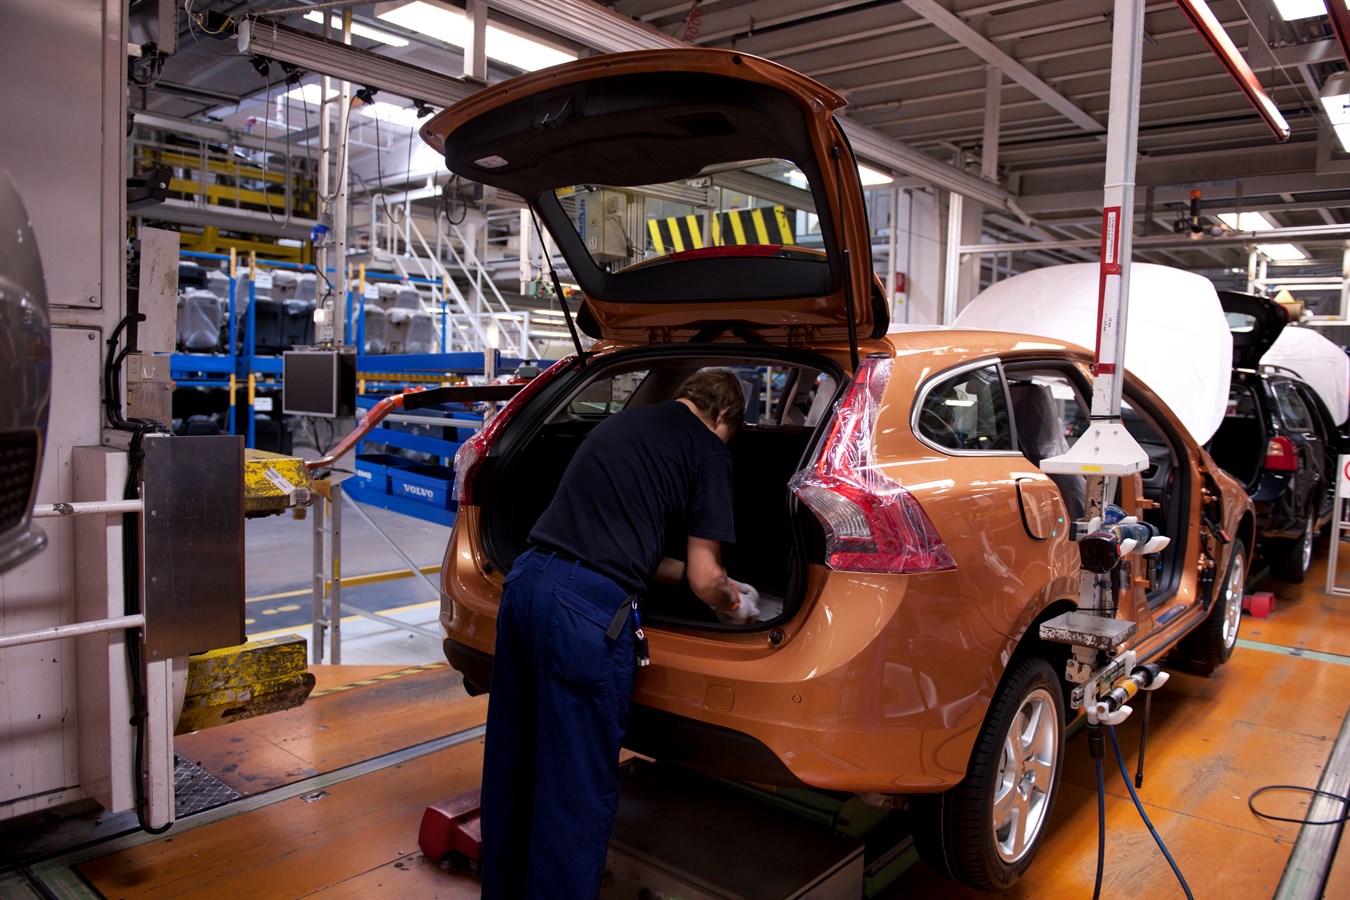 The production of the new V60 started 2010 in the Torslanda plant.